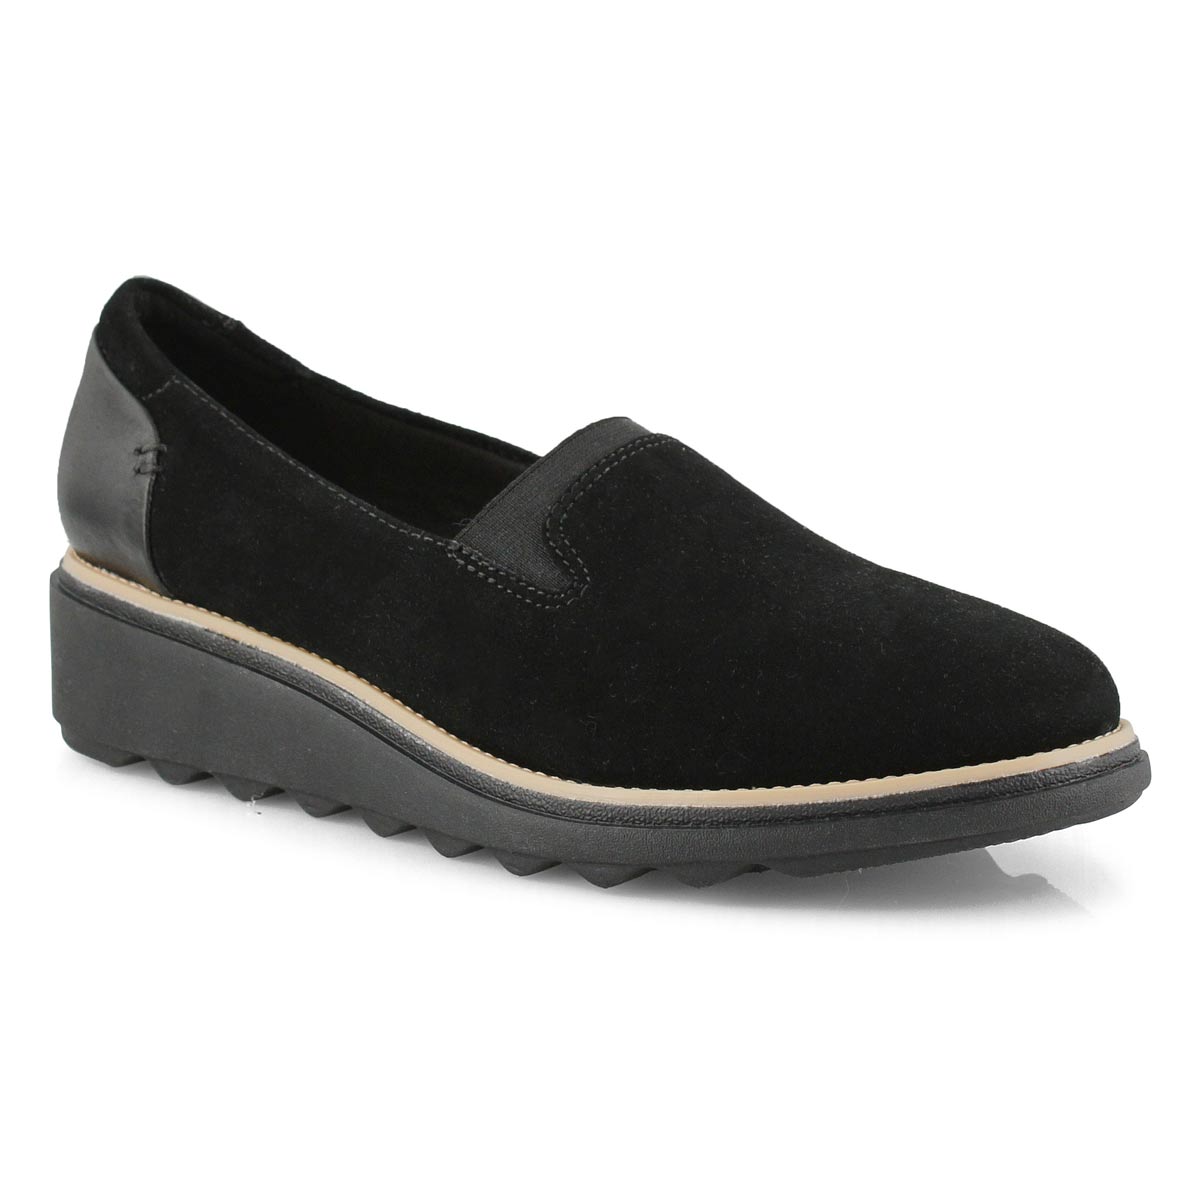 Clarks Women's Sharon Dolly Casual Loafer - P | SoftMoc.com